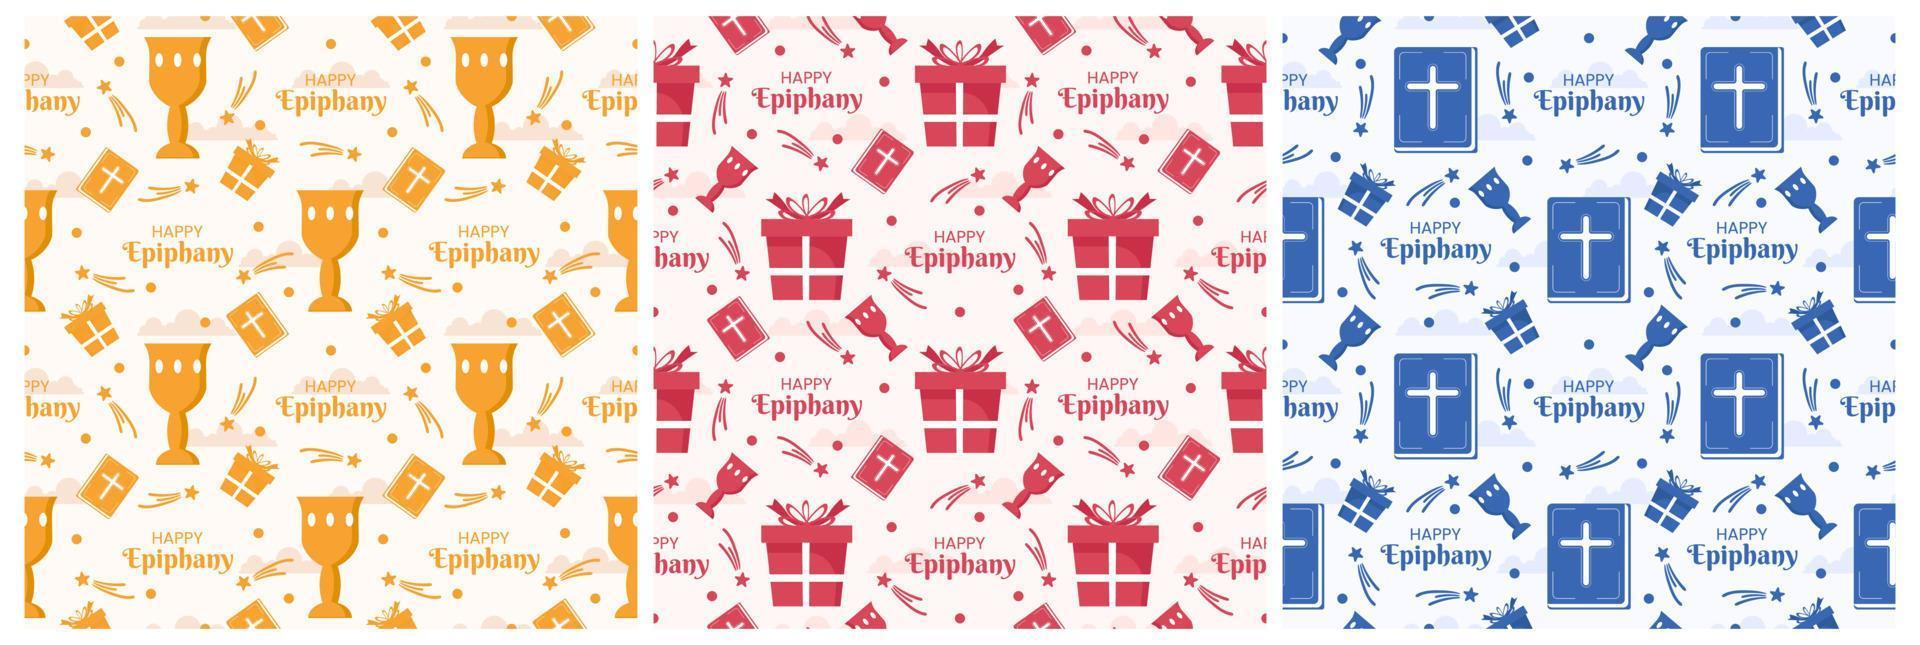 Set of Happy Epiphany Day Seamless Pattern Design Christian Festival to Faith in Template Hand Drawn Cartoon Flat Illustration vector